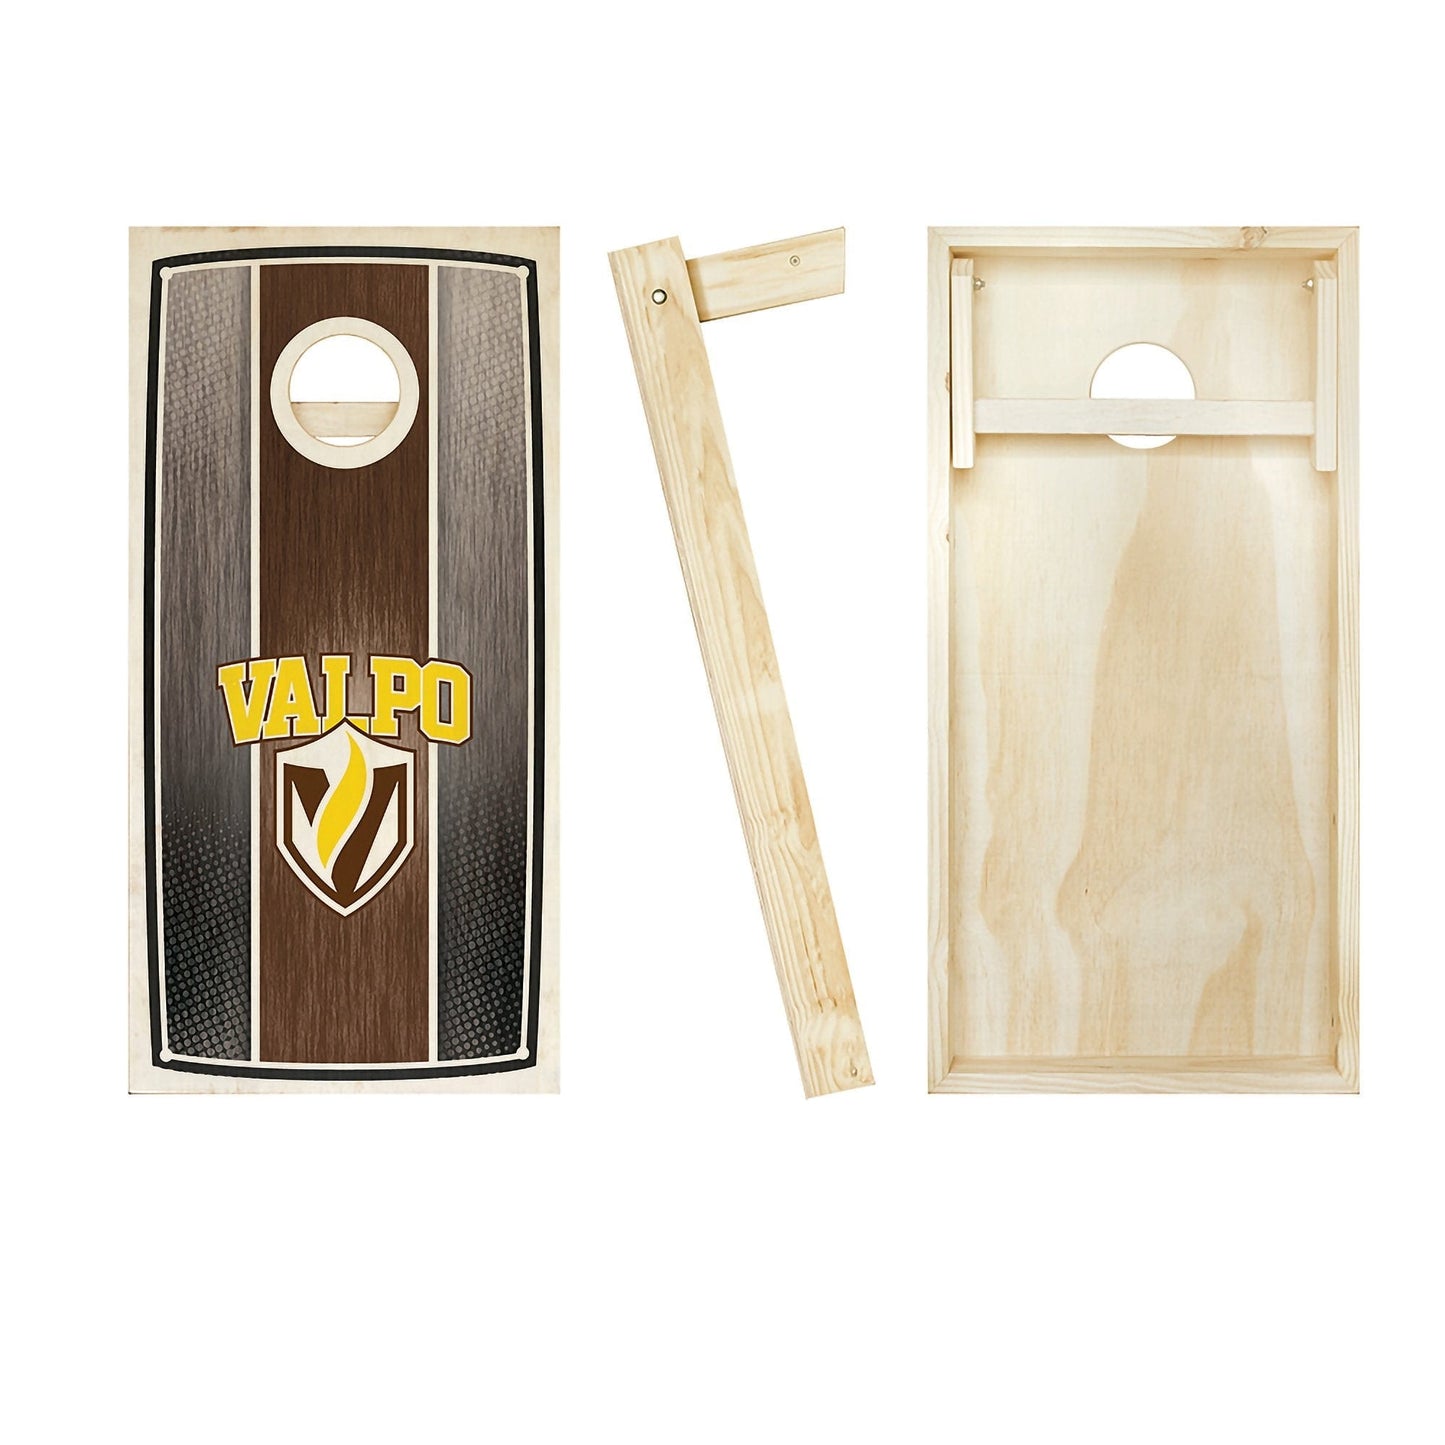 Valparaiso Stained Striped board entire set